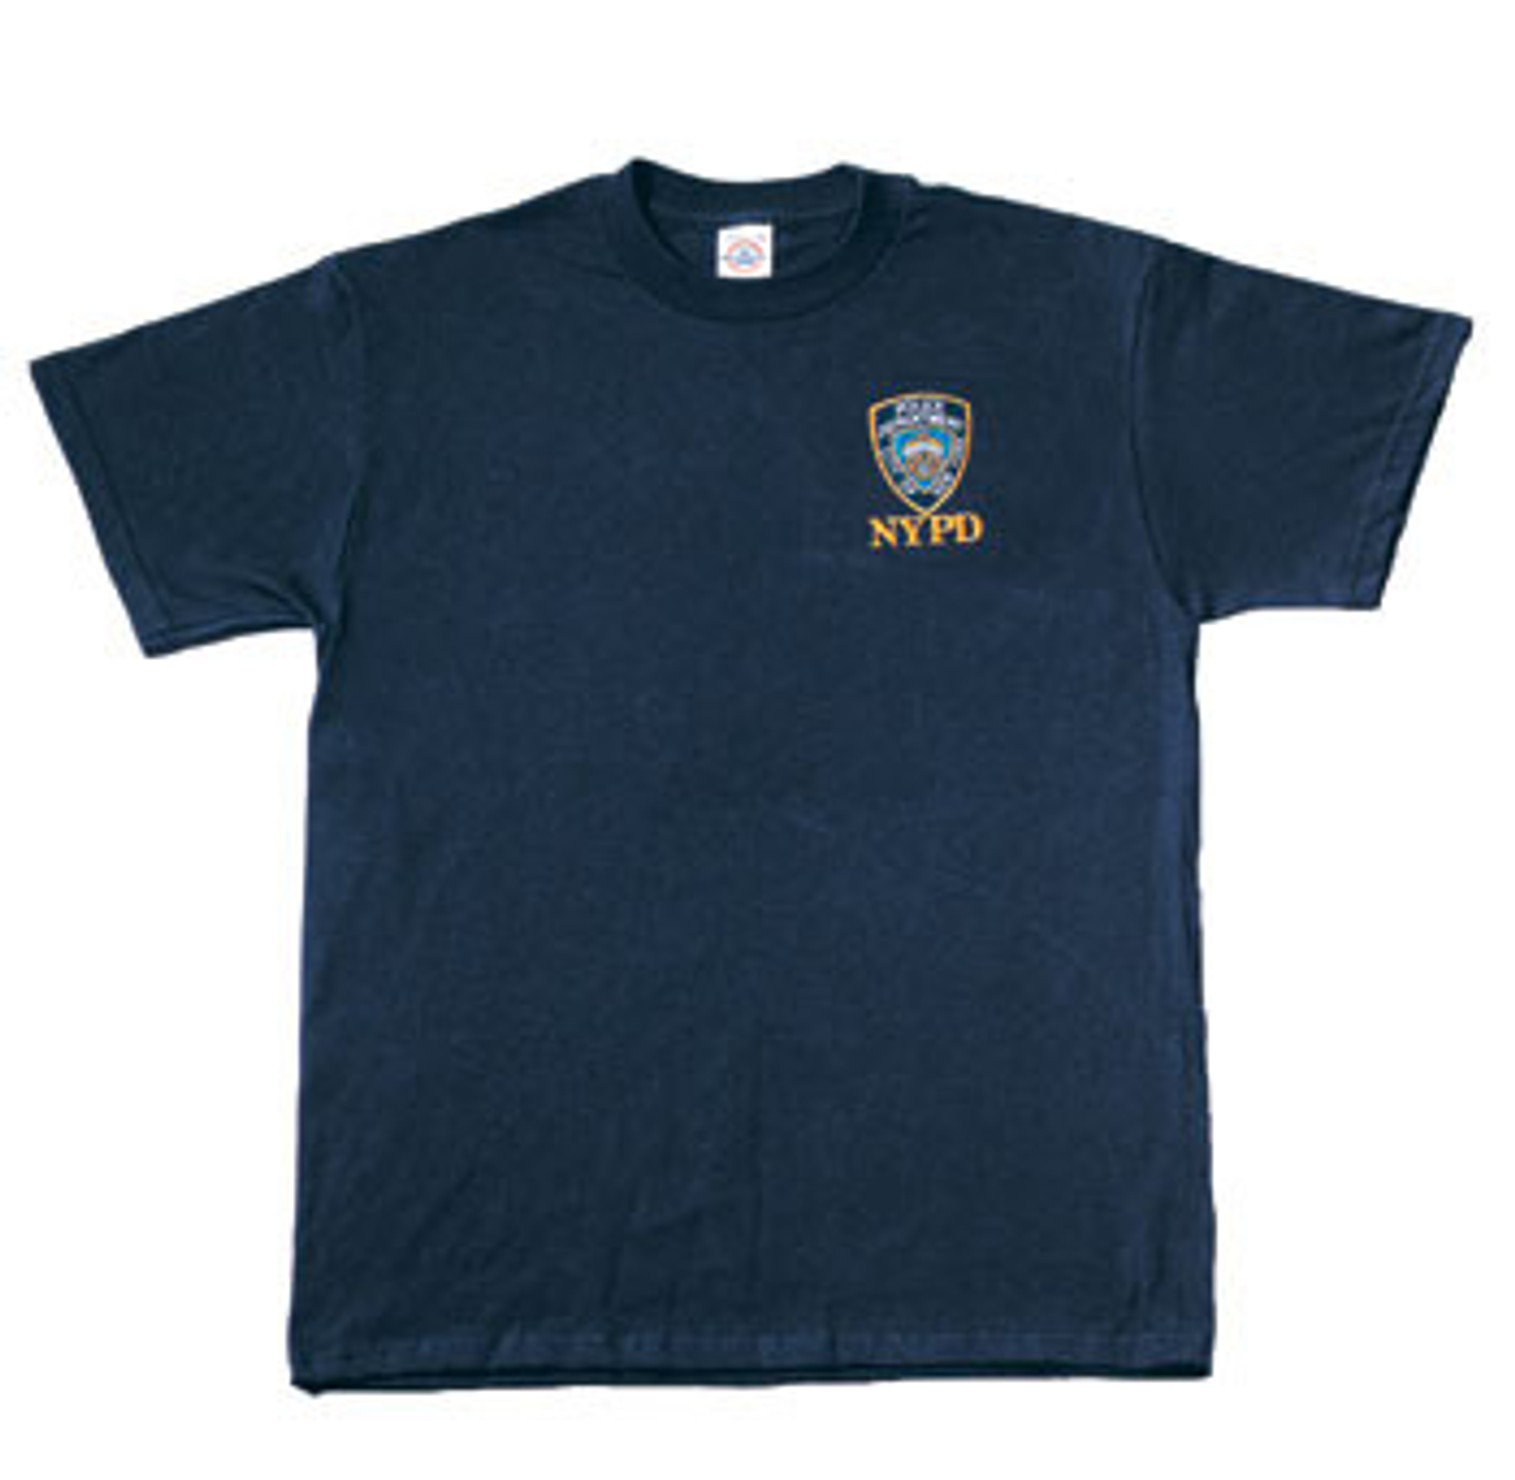 Officially Licensed NYPD Emblem T-Shirt